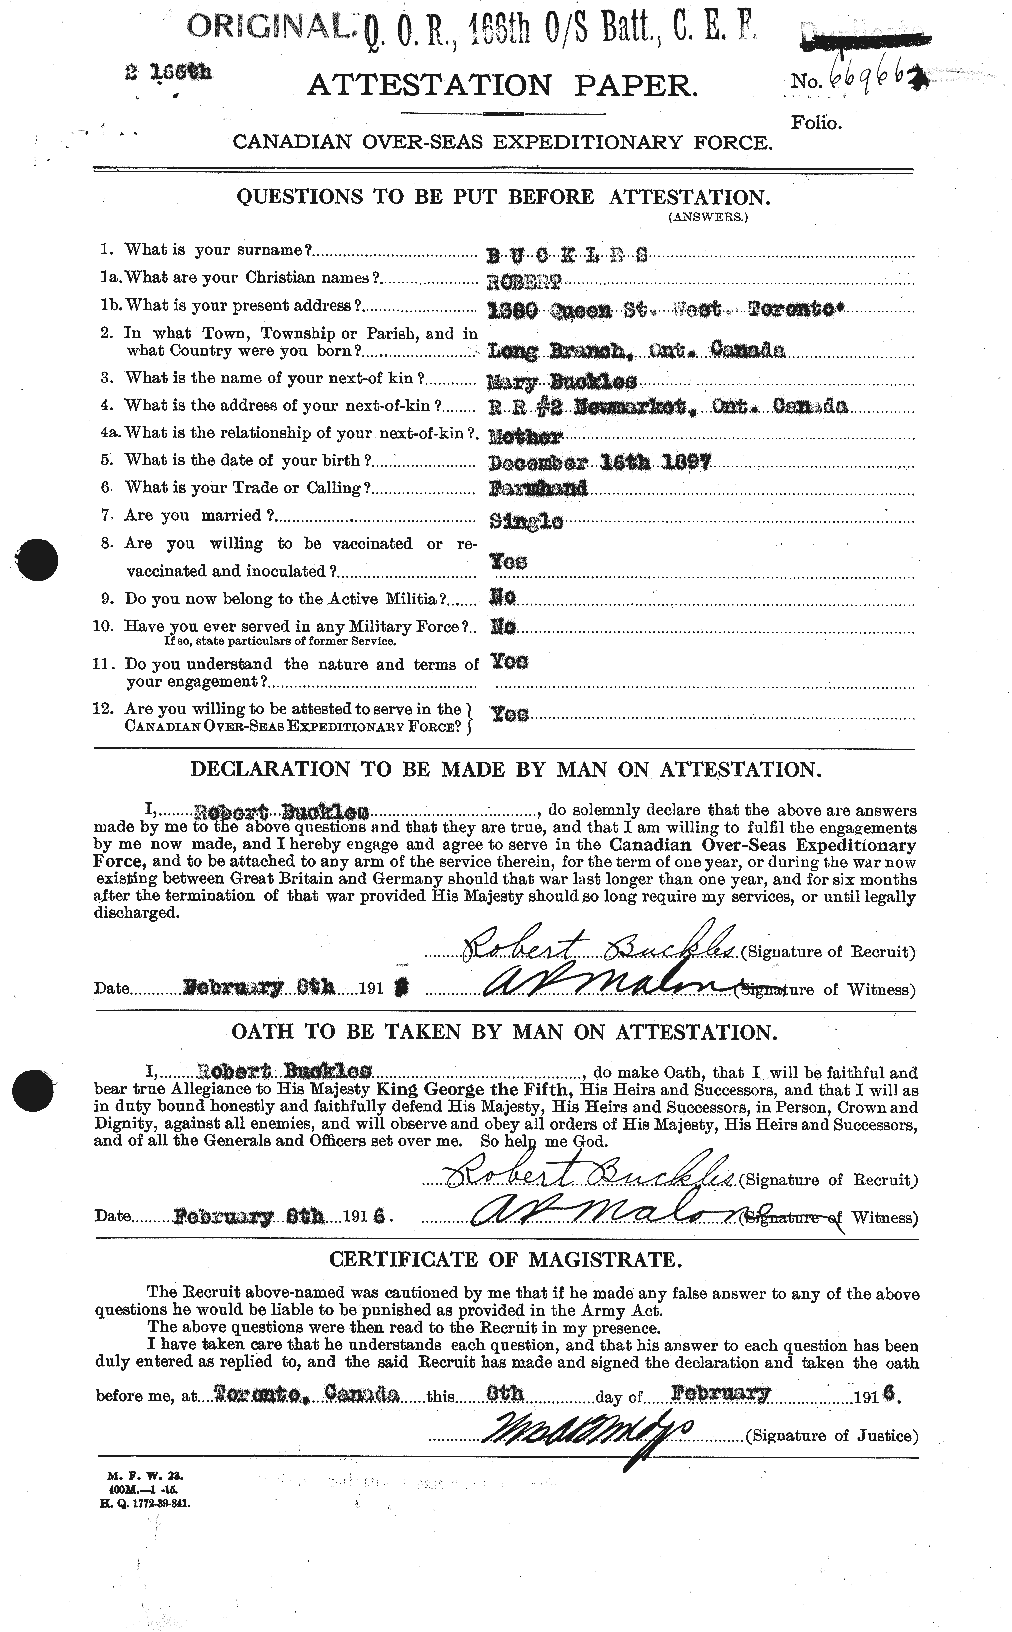 Personnel Records of the First World War - CEF 270185a